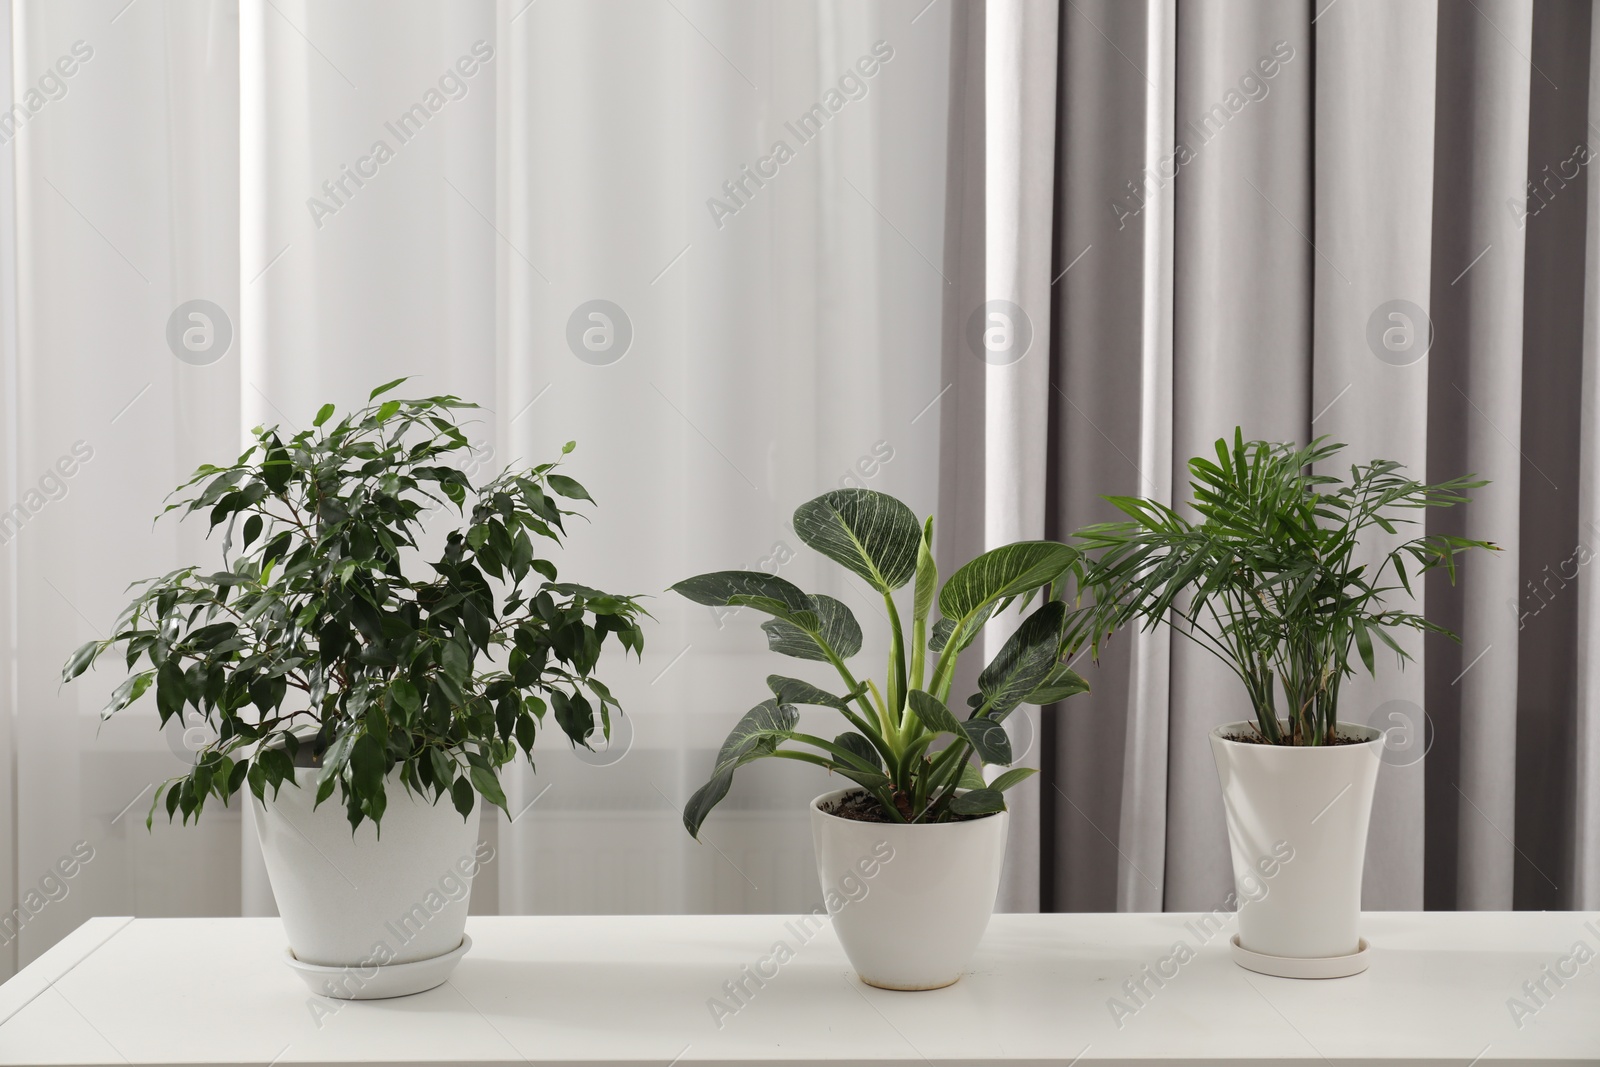 Photo of Potted houseplants with green leaves on white table indoors